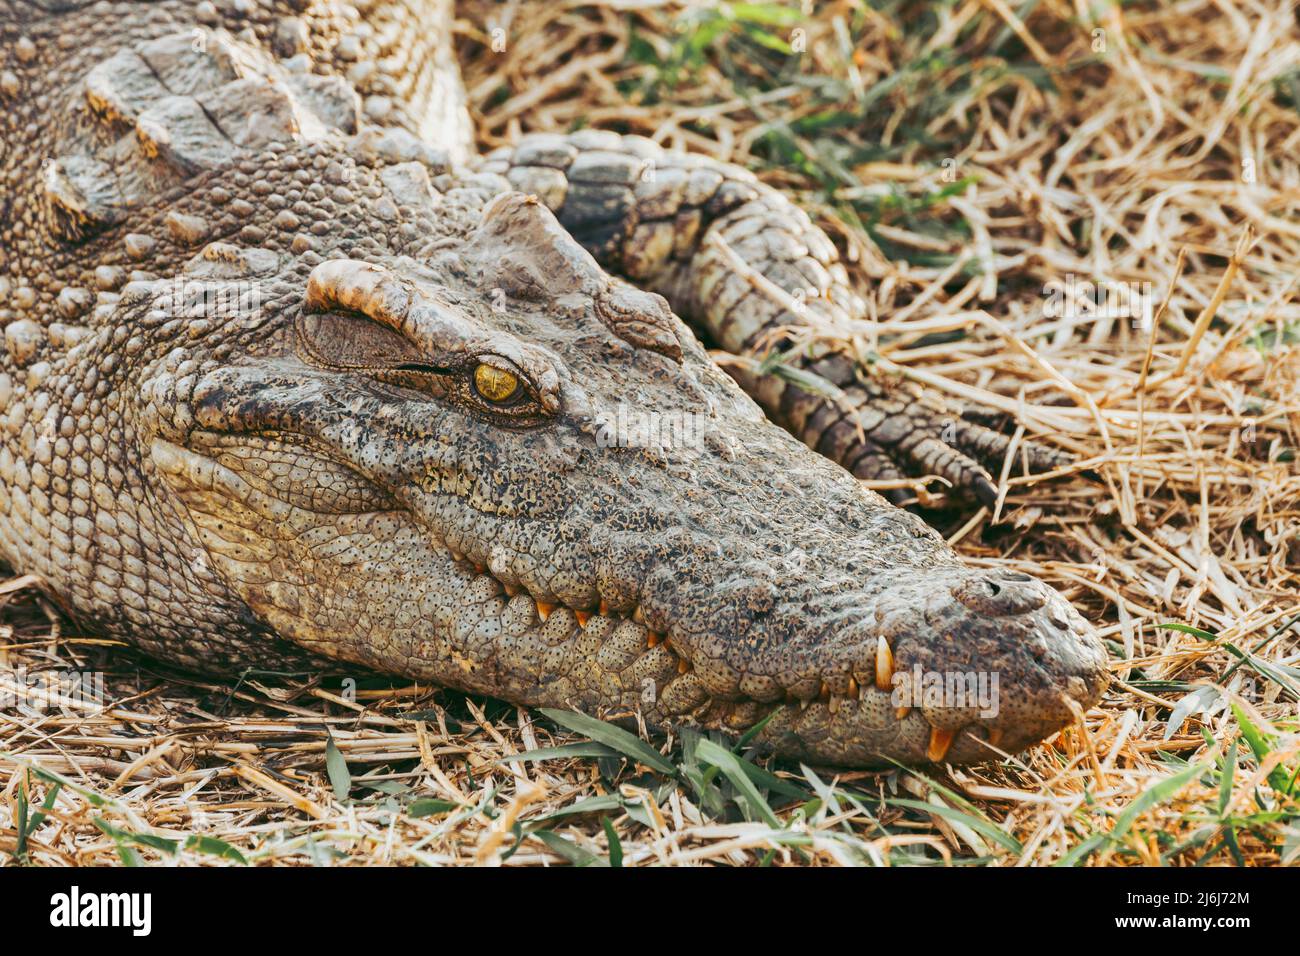 hungry wildlife crocodile hidden in the grass for hunting prey near the river. Stock Photo